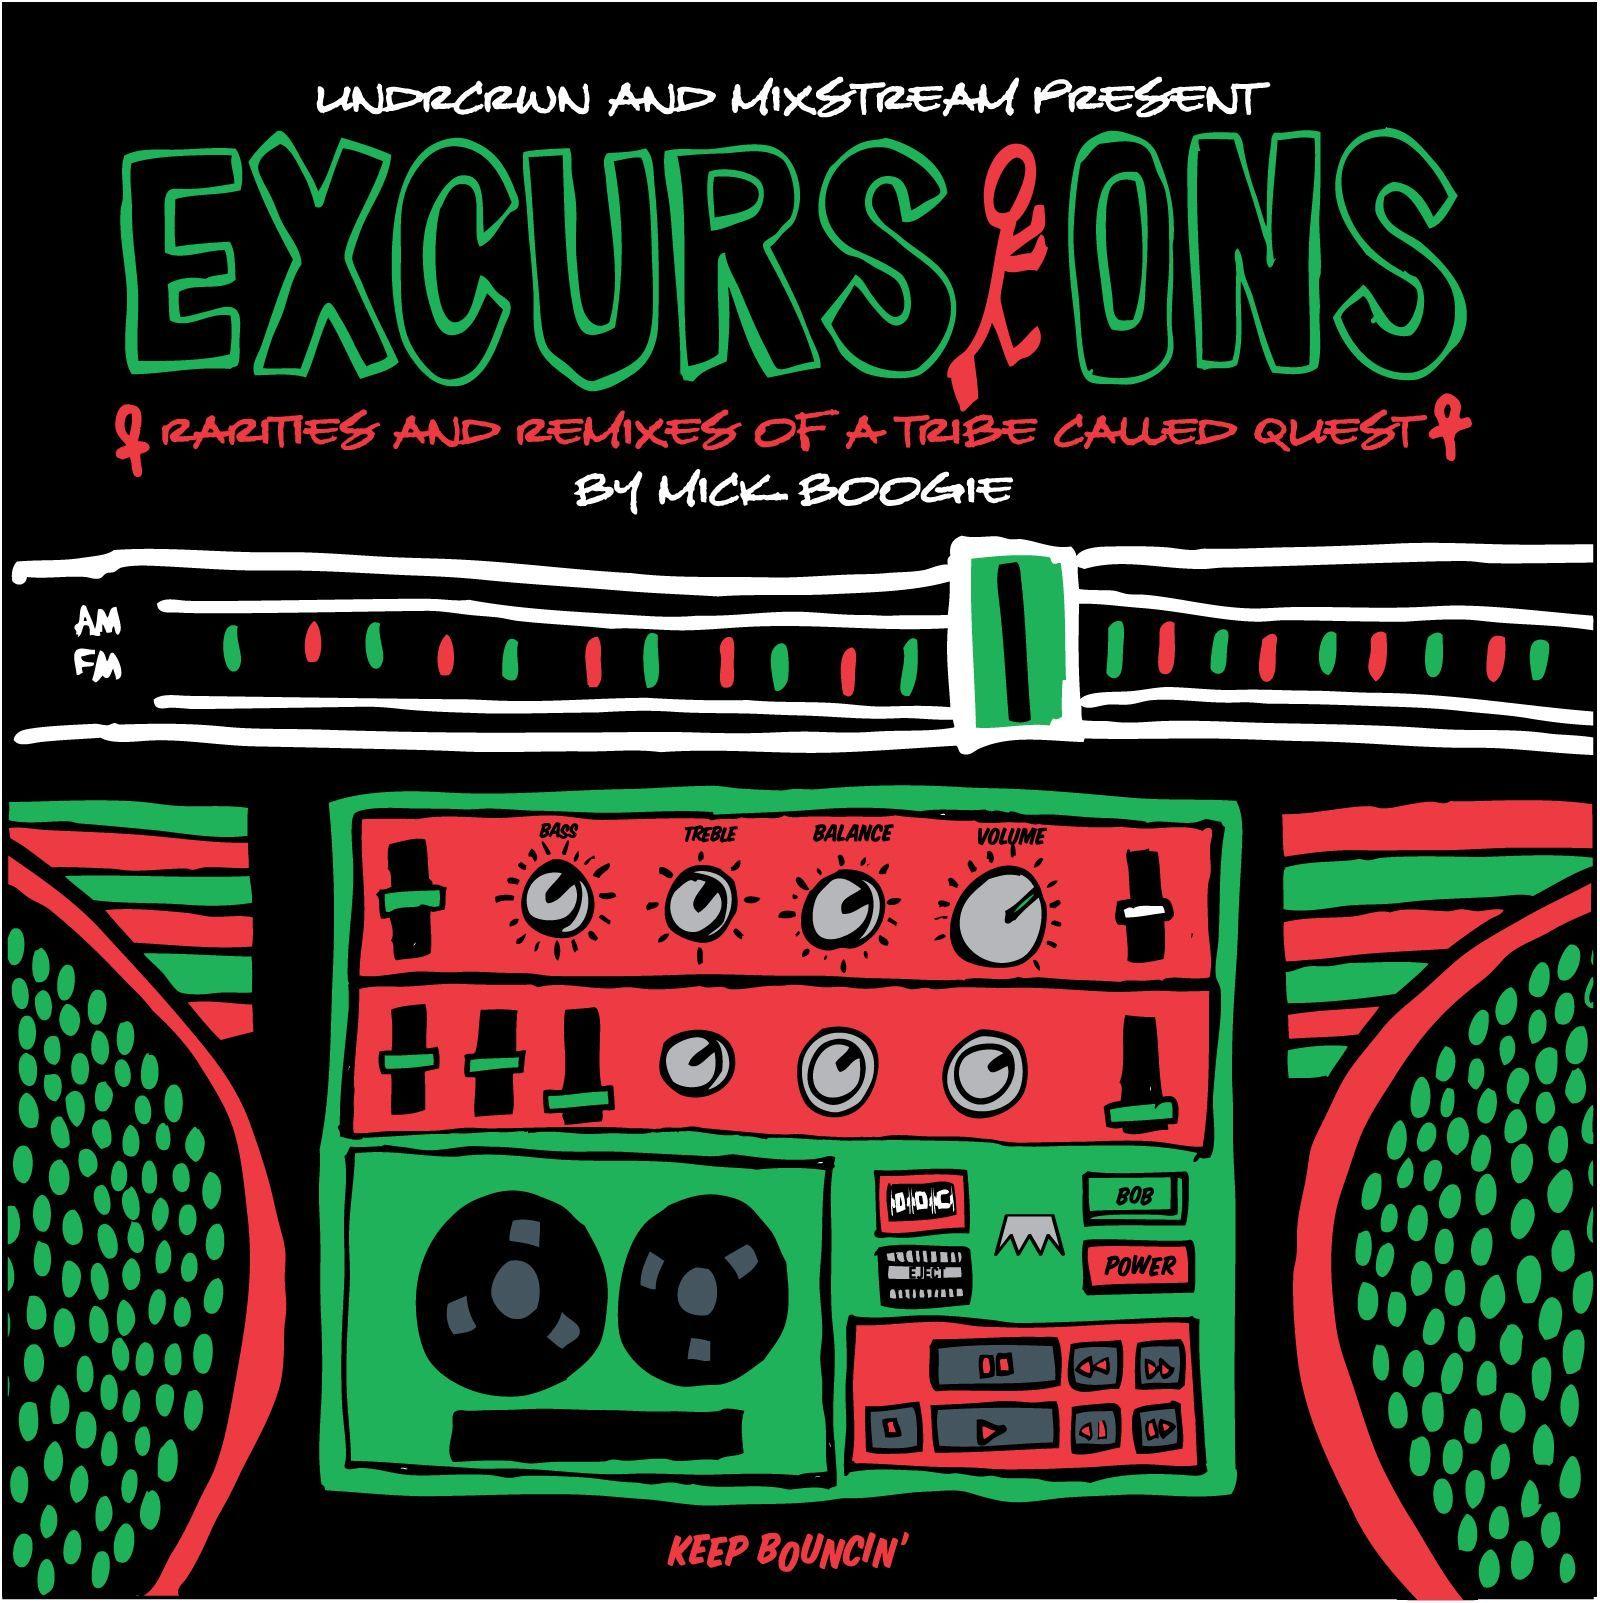 Excursions by Mick Boogie and Remixes of A Tribe Called